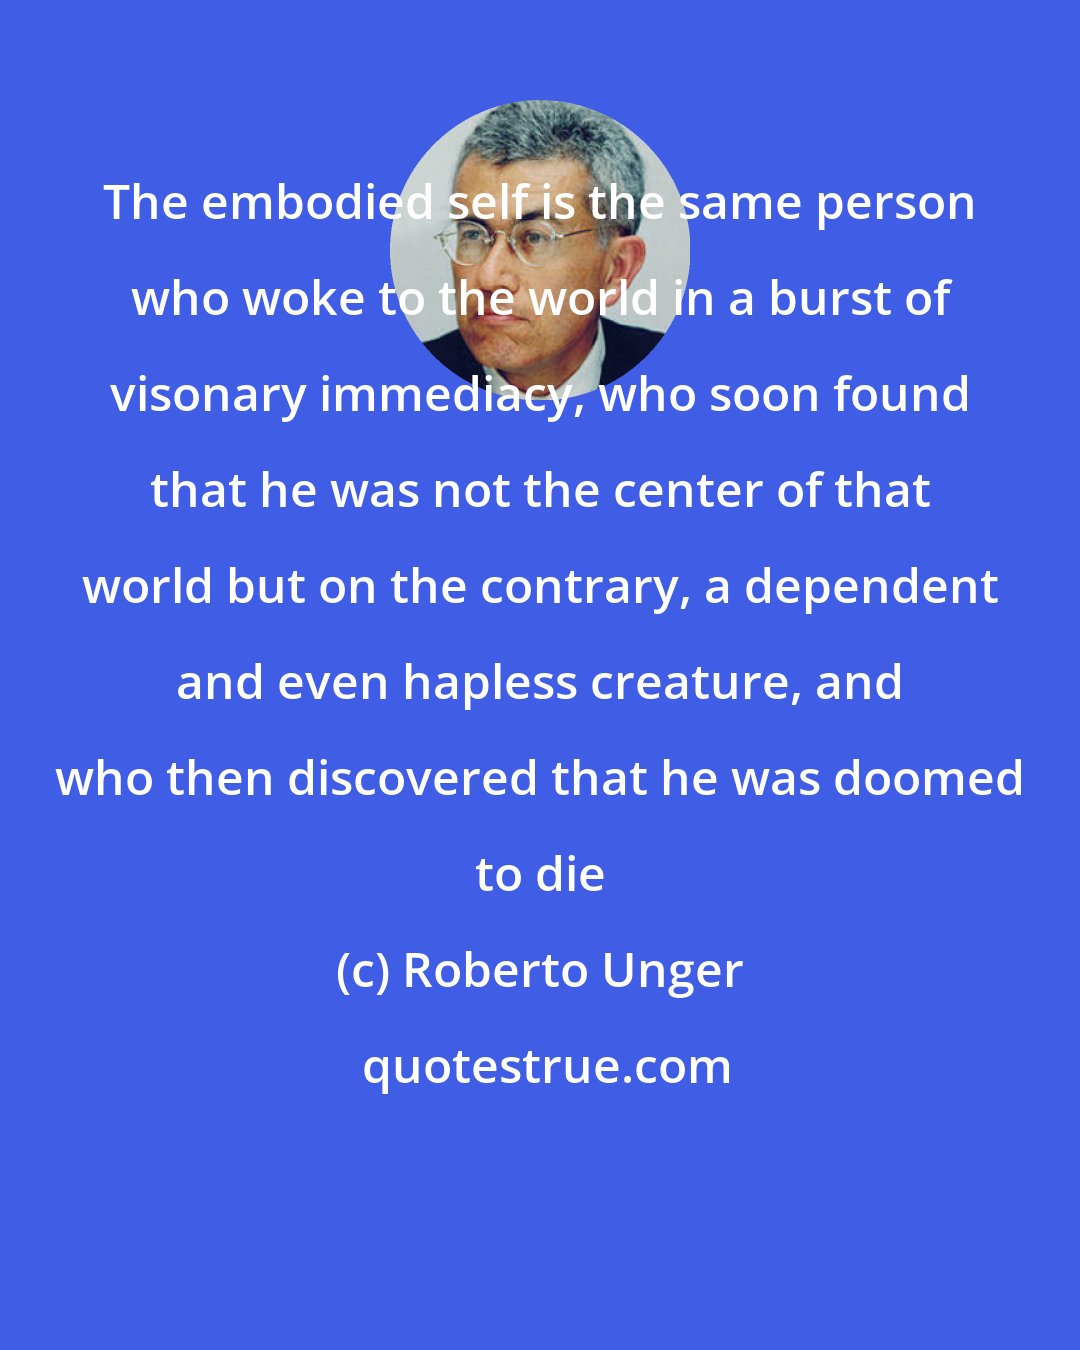 Roberto Unger: The embodied self is the same person who woke to the world in a burst of visonary immediacy, who soon found that he was not the center of that world but on the contrary, a dependent and even hapless creature, and who then discovered that he was doomed to die